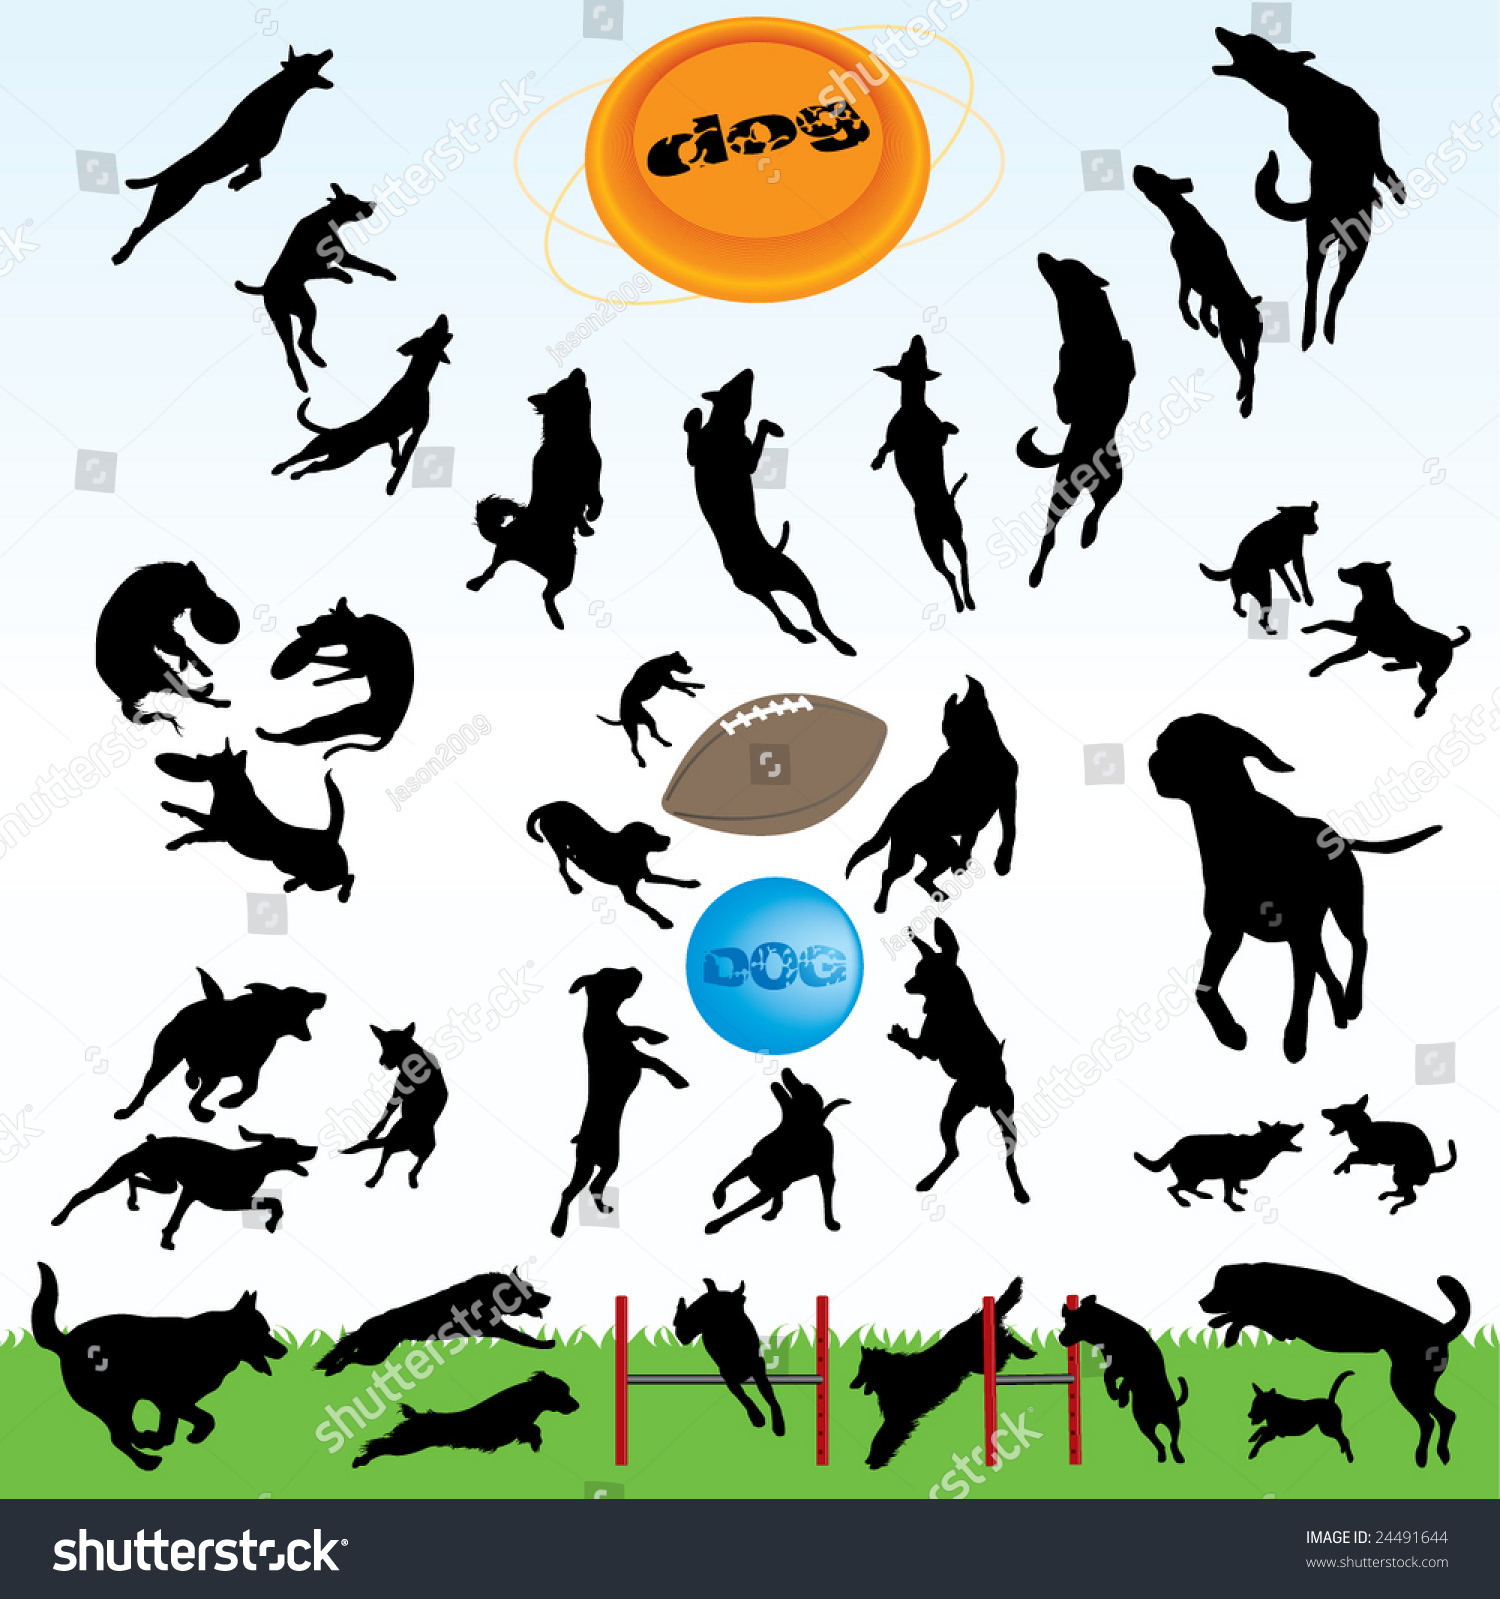 SVG of dogs silhouette part 1 of 3:happy dog's play svg